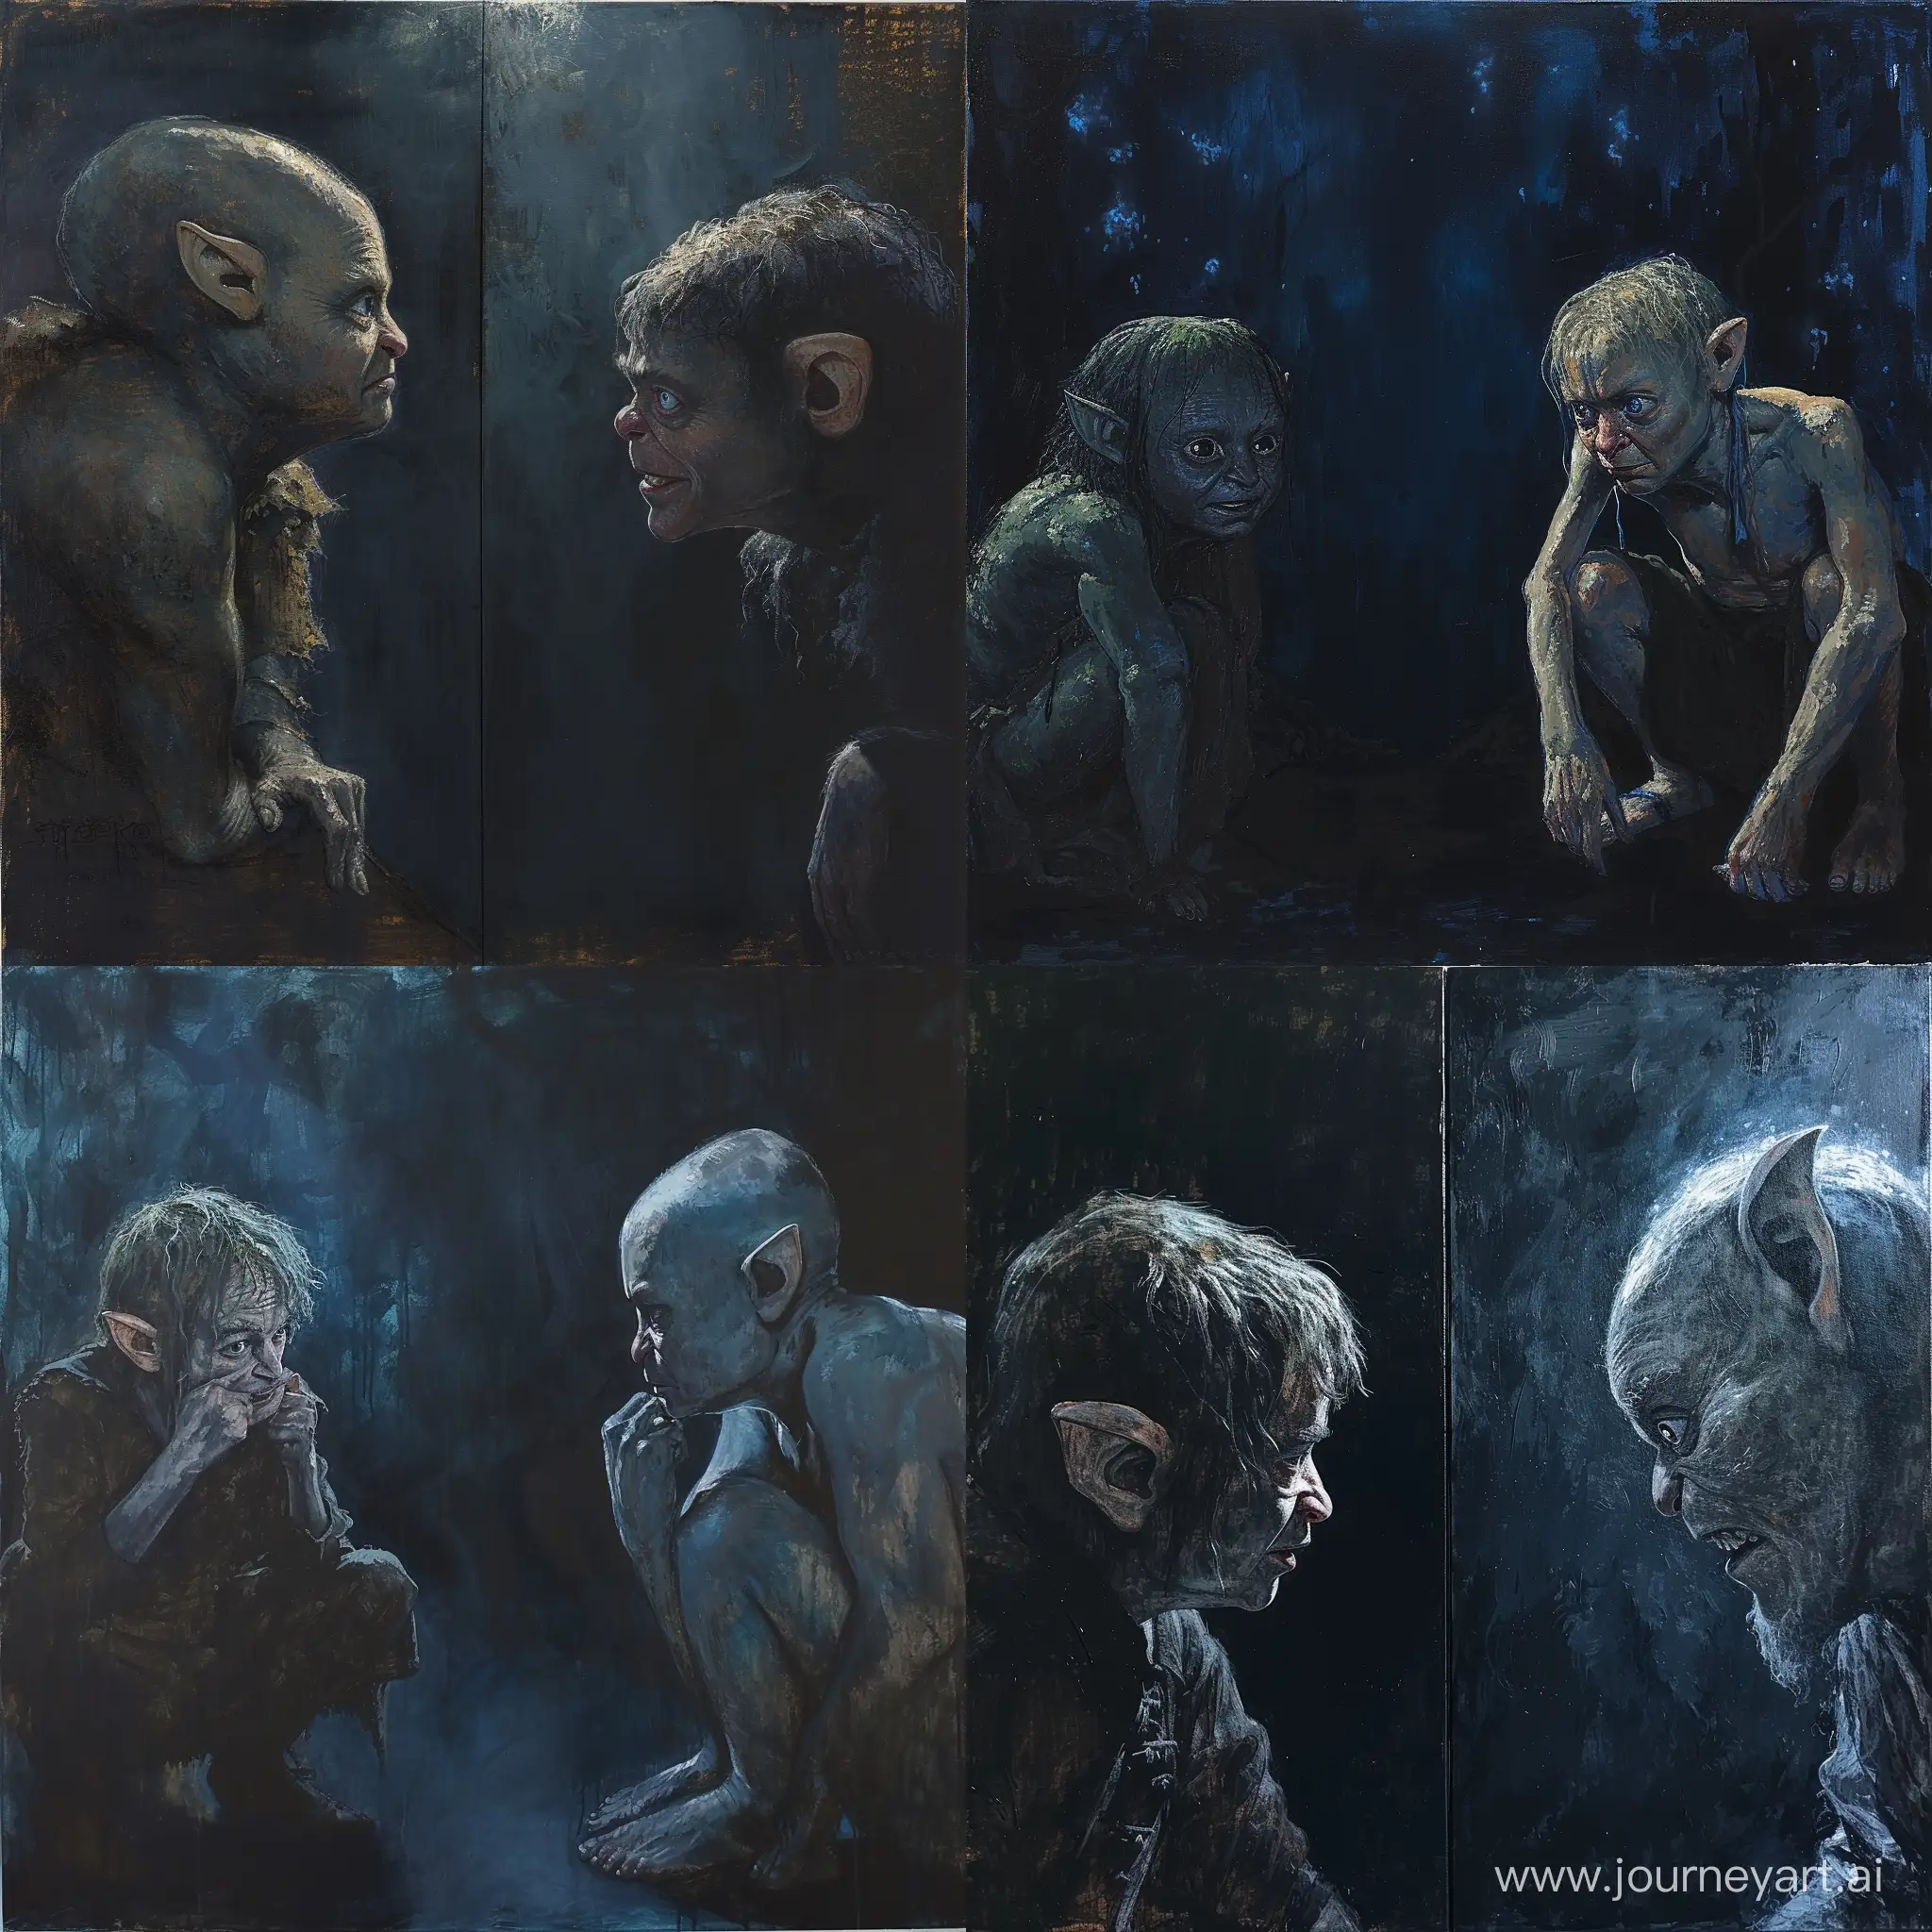 Riddles in the Dark with Gollum, Acrylic. Bilbo and Gollum are positioned on opposing sides, with a psychological divide. The dark palette with occasional gleams highlights the eerie, suspenseful atmosphere. The mood is tense, reflecting the mental duel.  In the style of Donato Giancola.